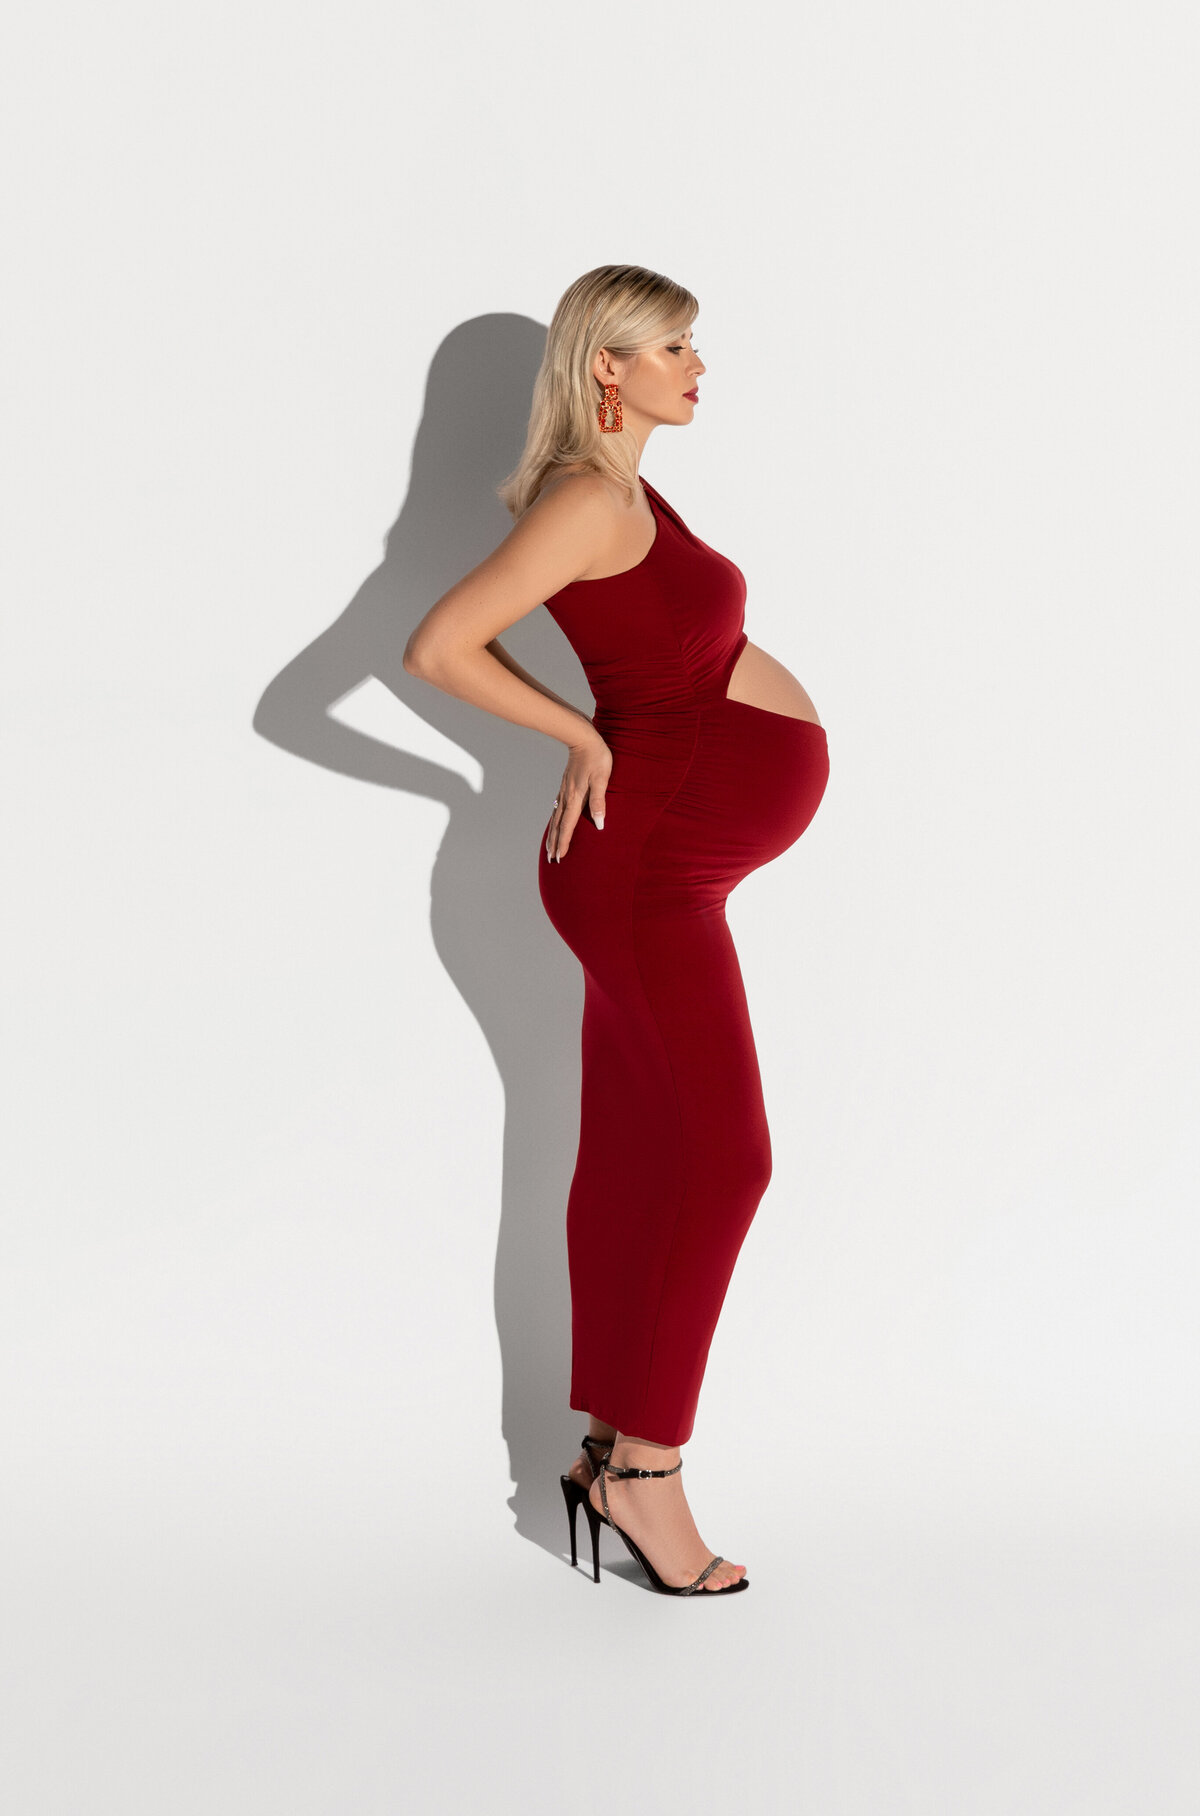 maternity photography with red dress